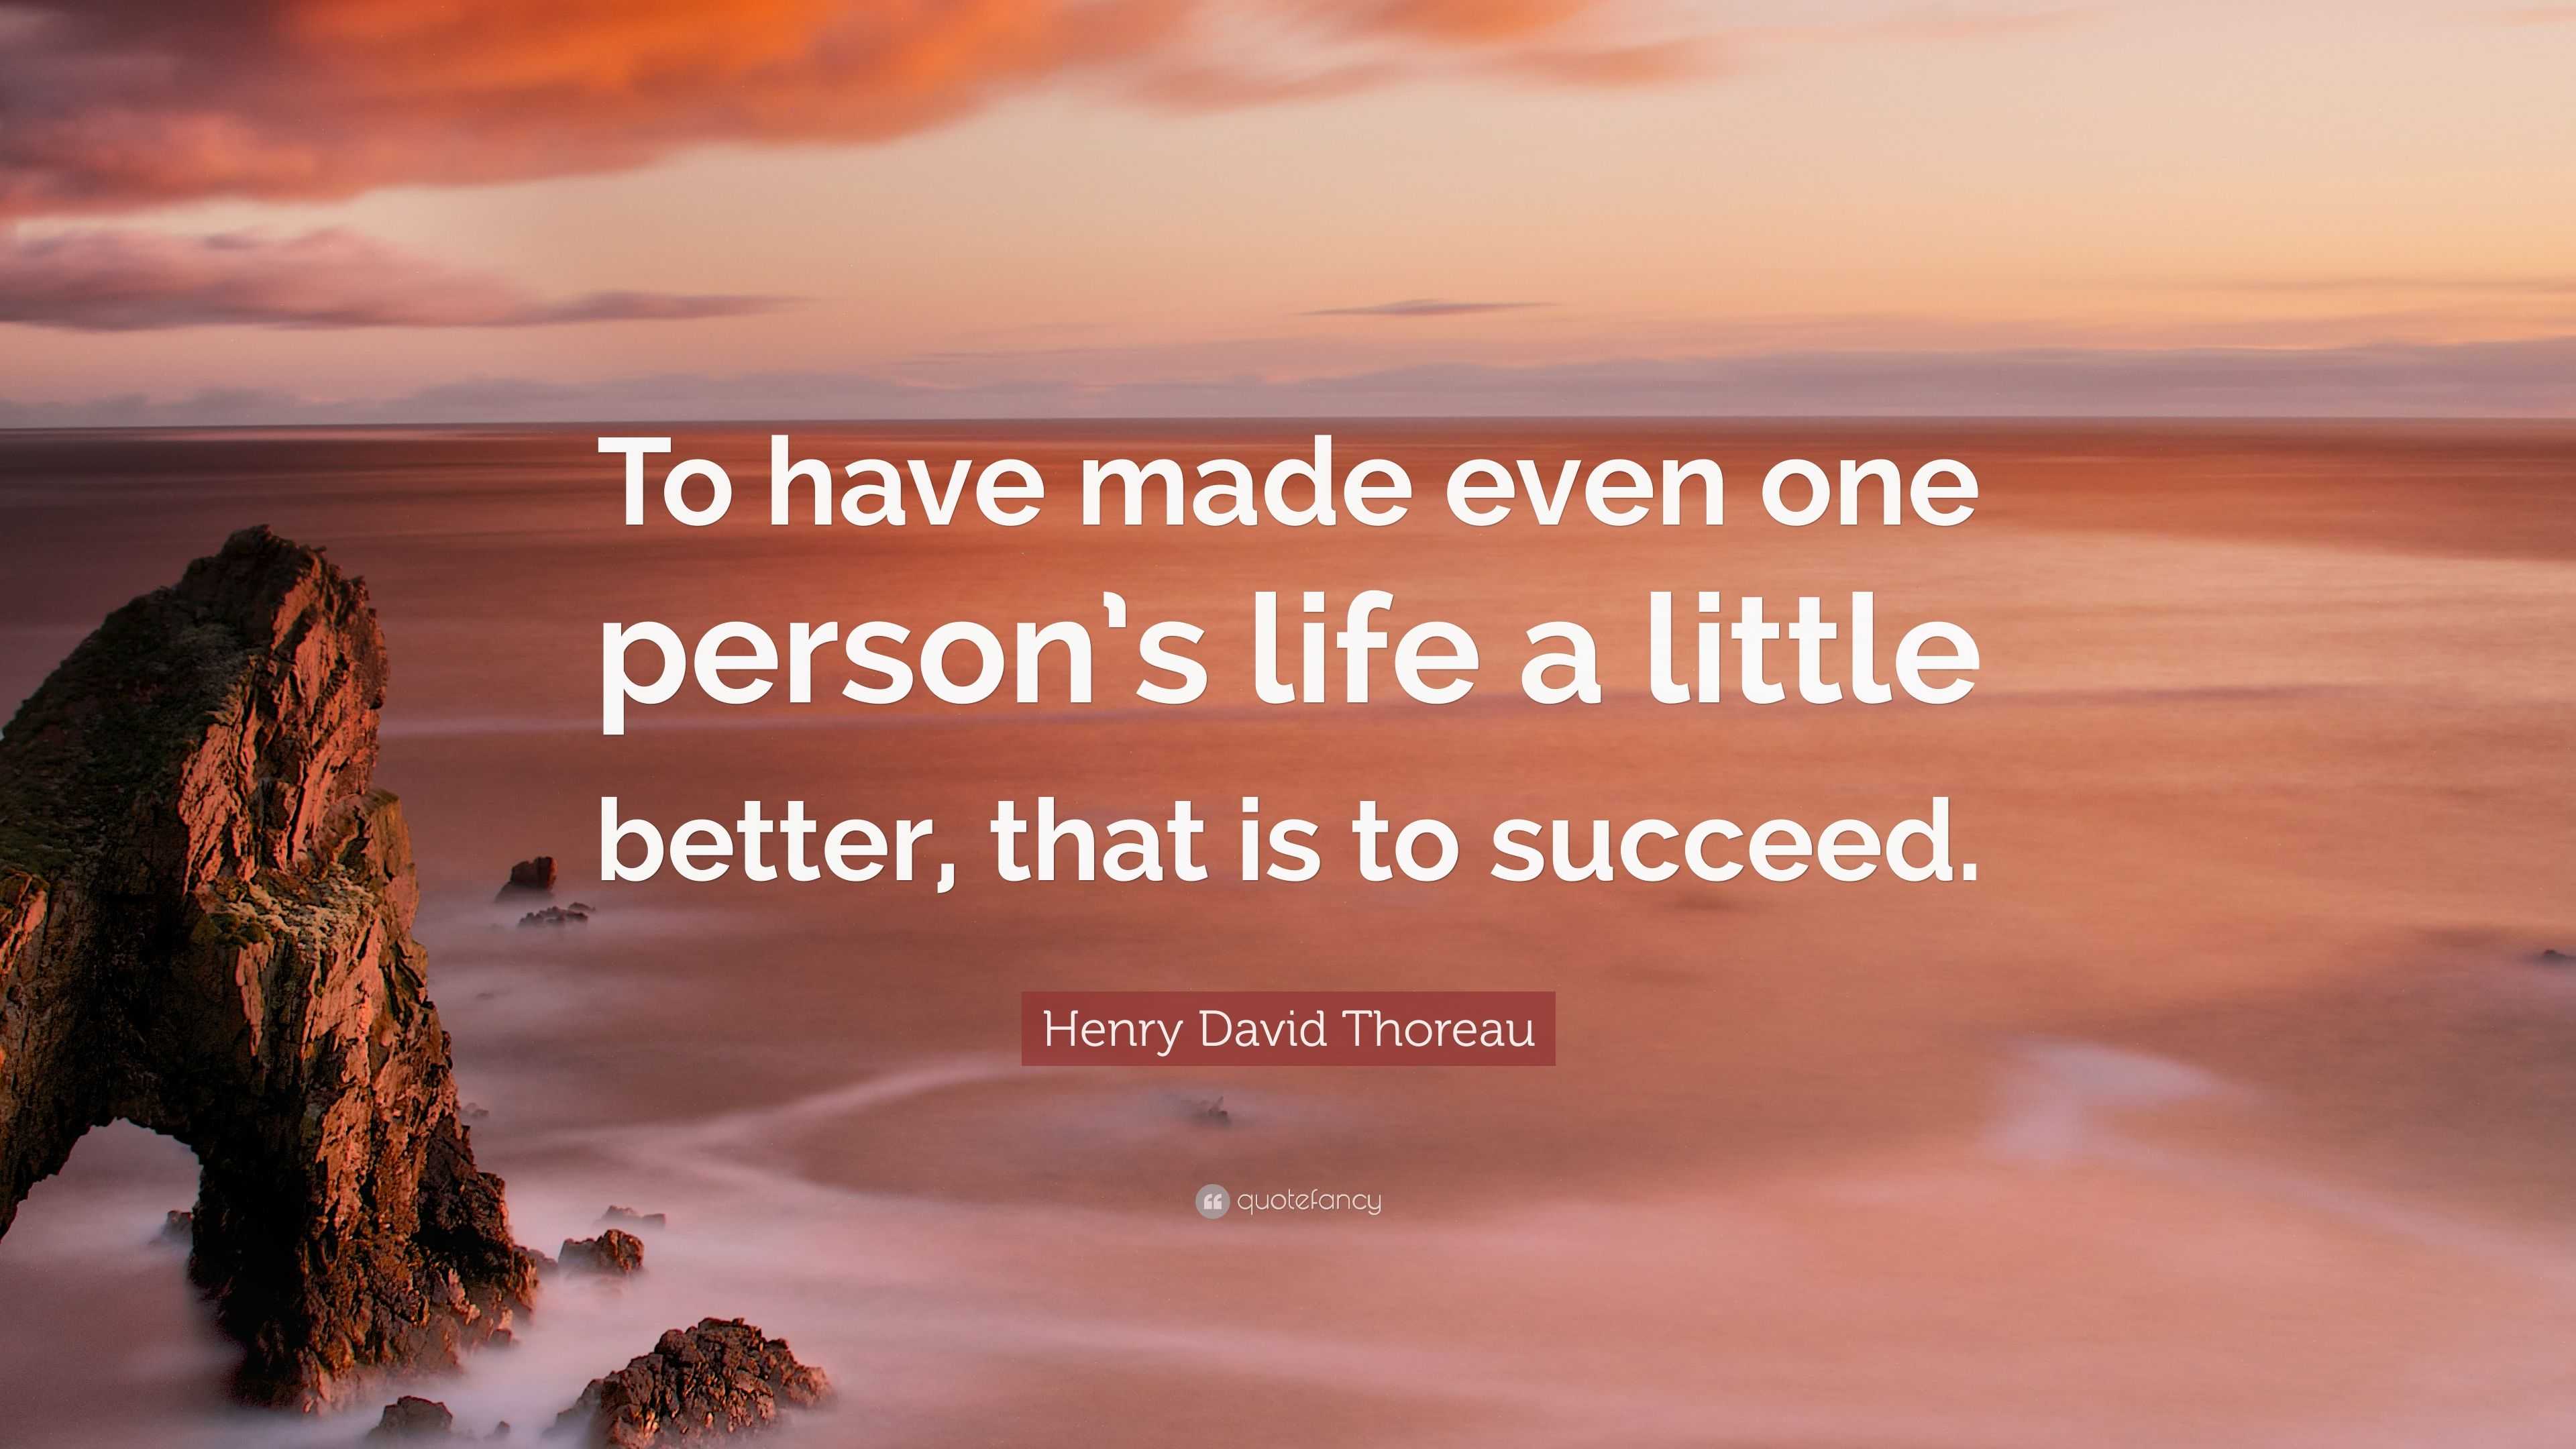 Henry David Thoreau Quote: “To have made even one person’s life a